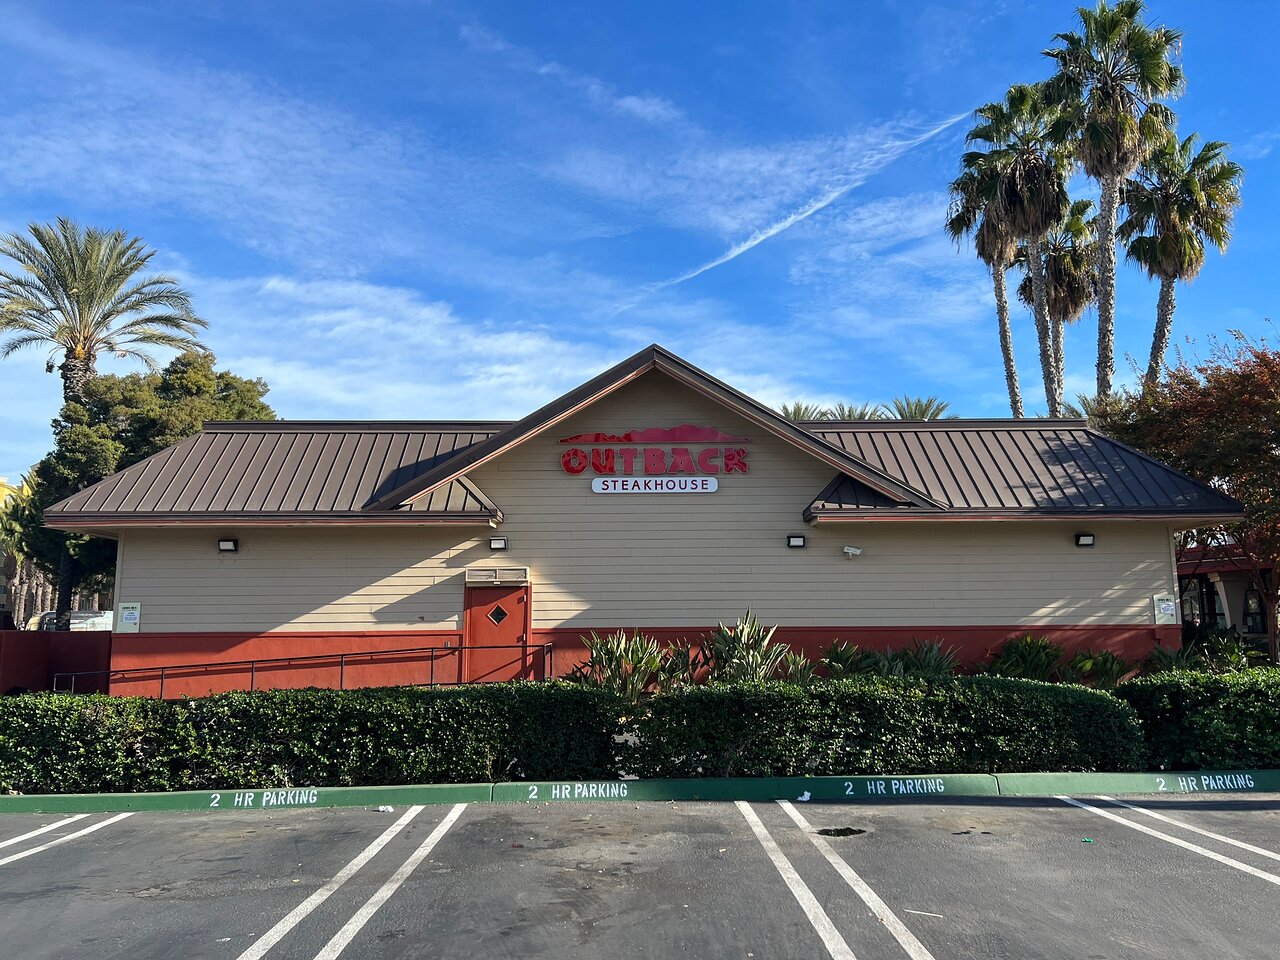 outback steakhouse costa mesa ca 92627